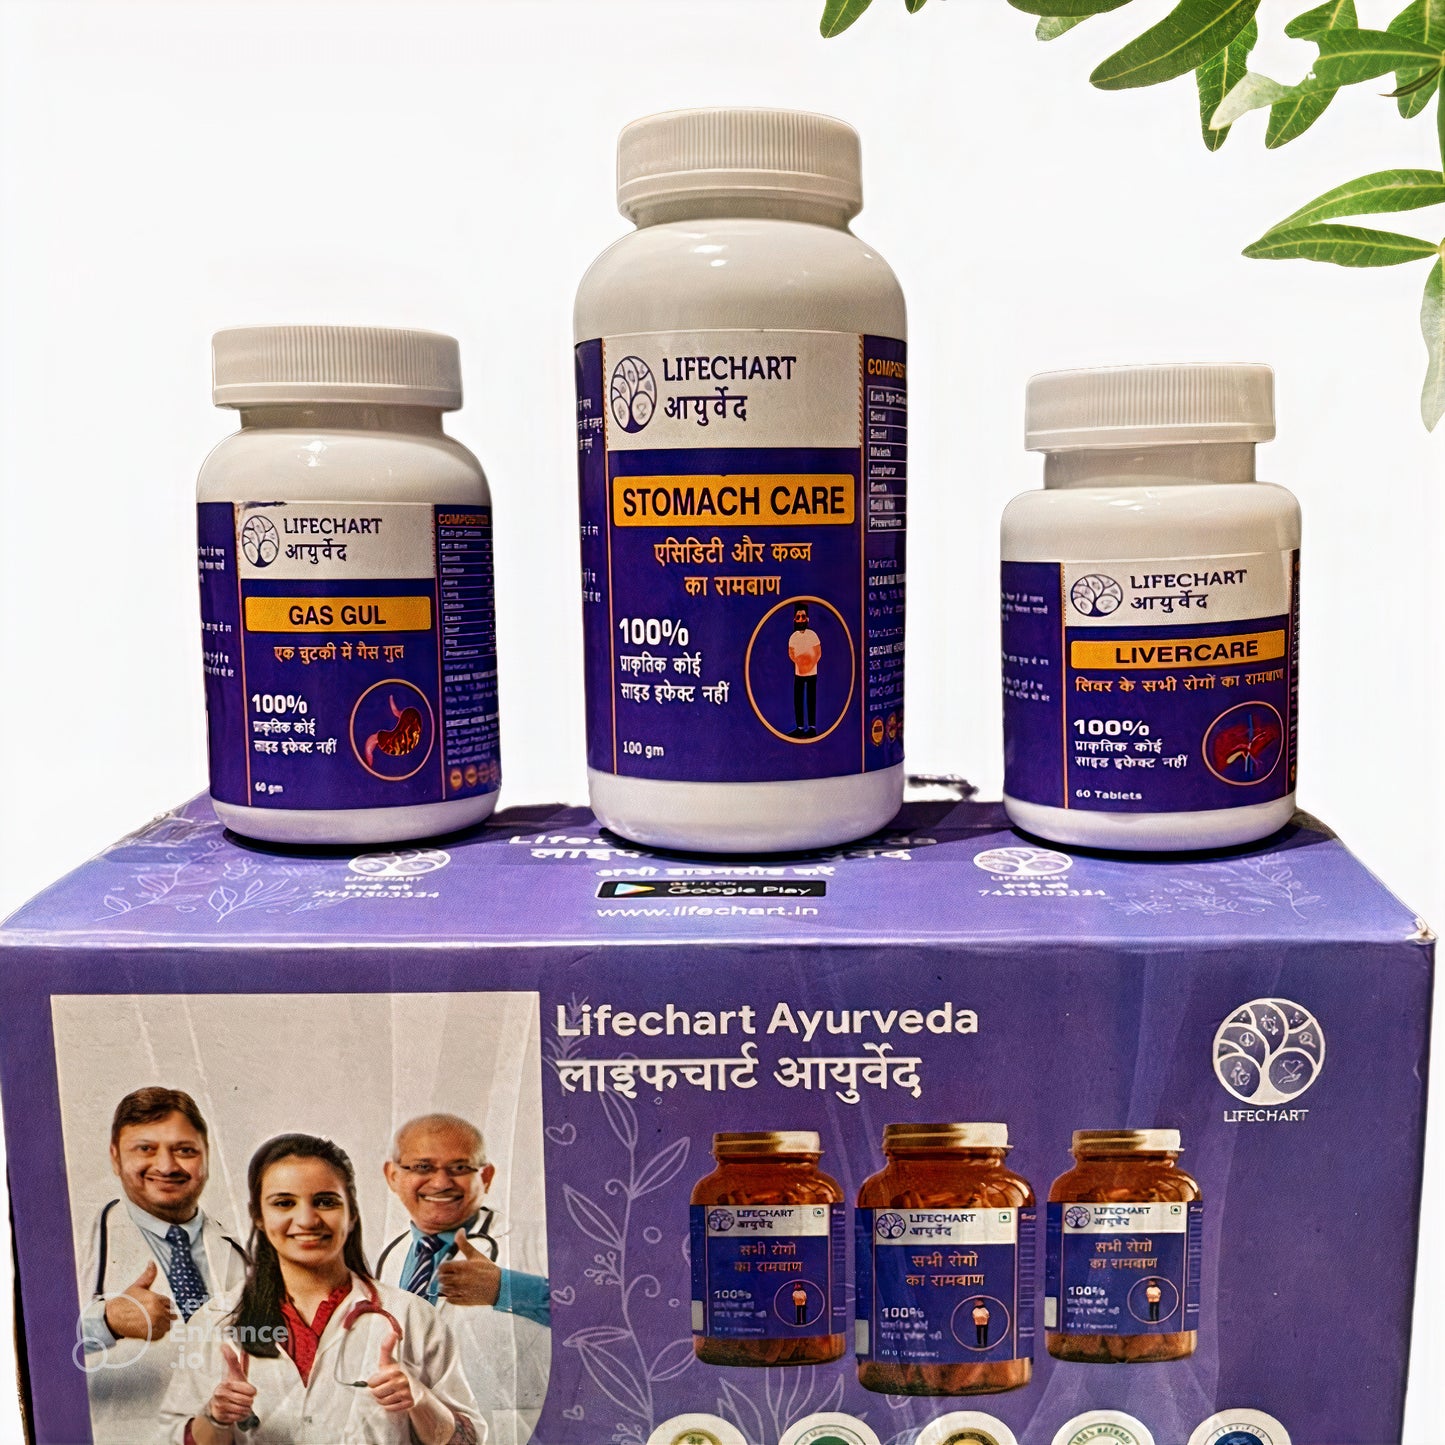 Digestive Care Kit by LifeChart Ayurveda (Instant Relief)-FICCI Lab tested